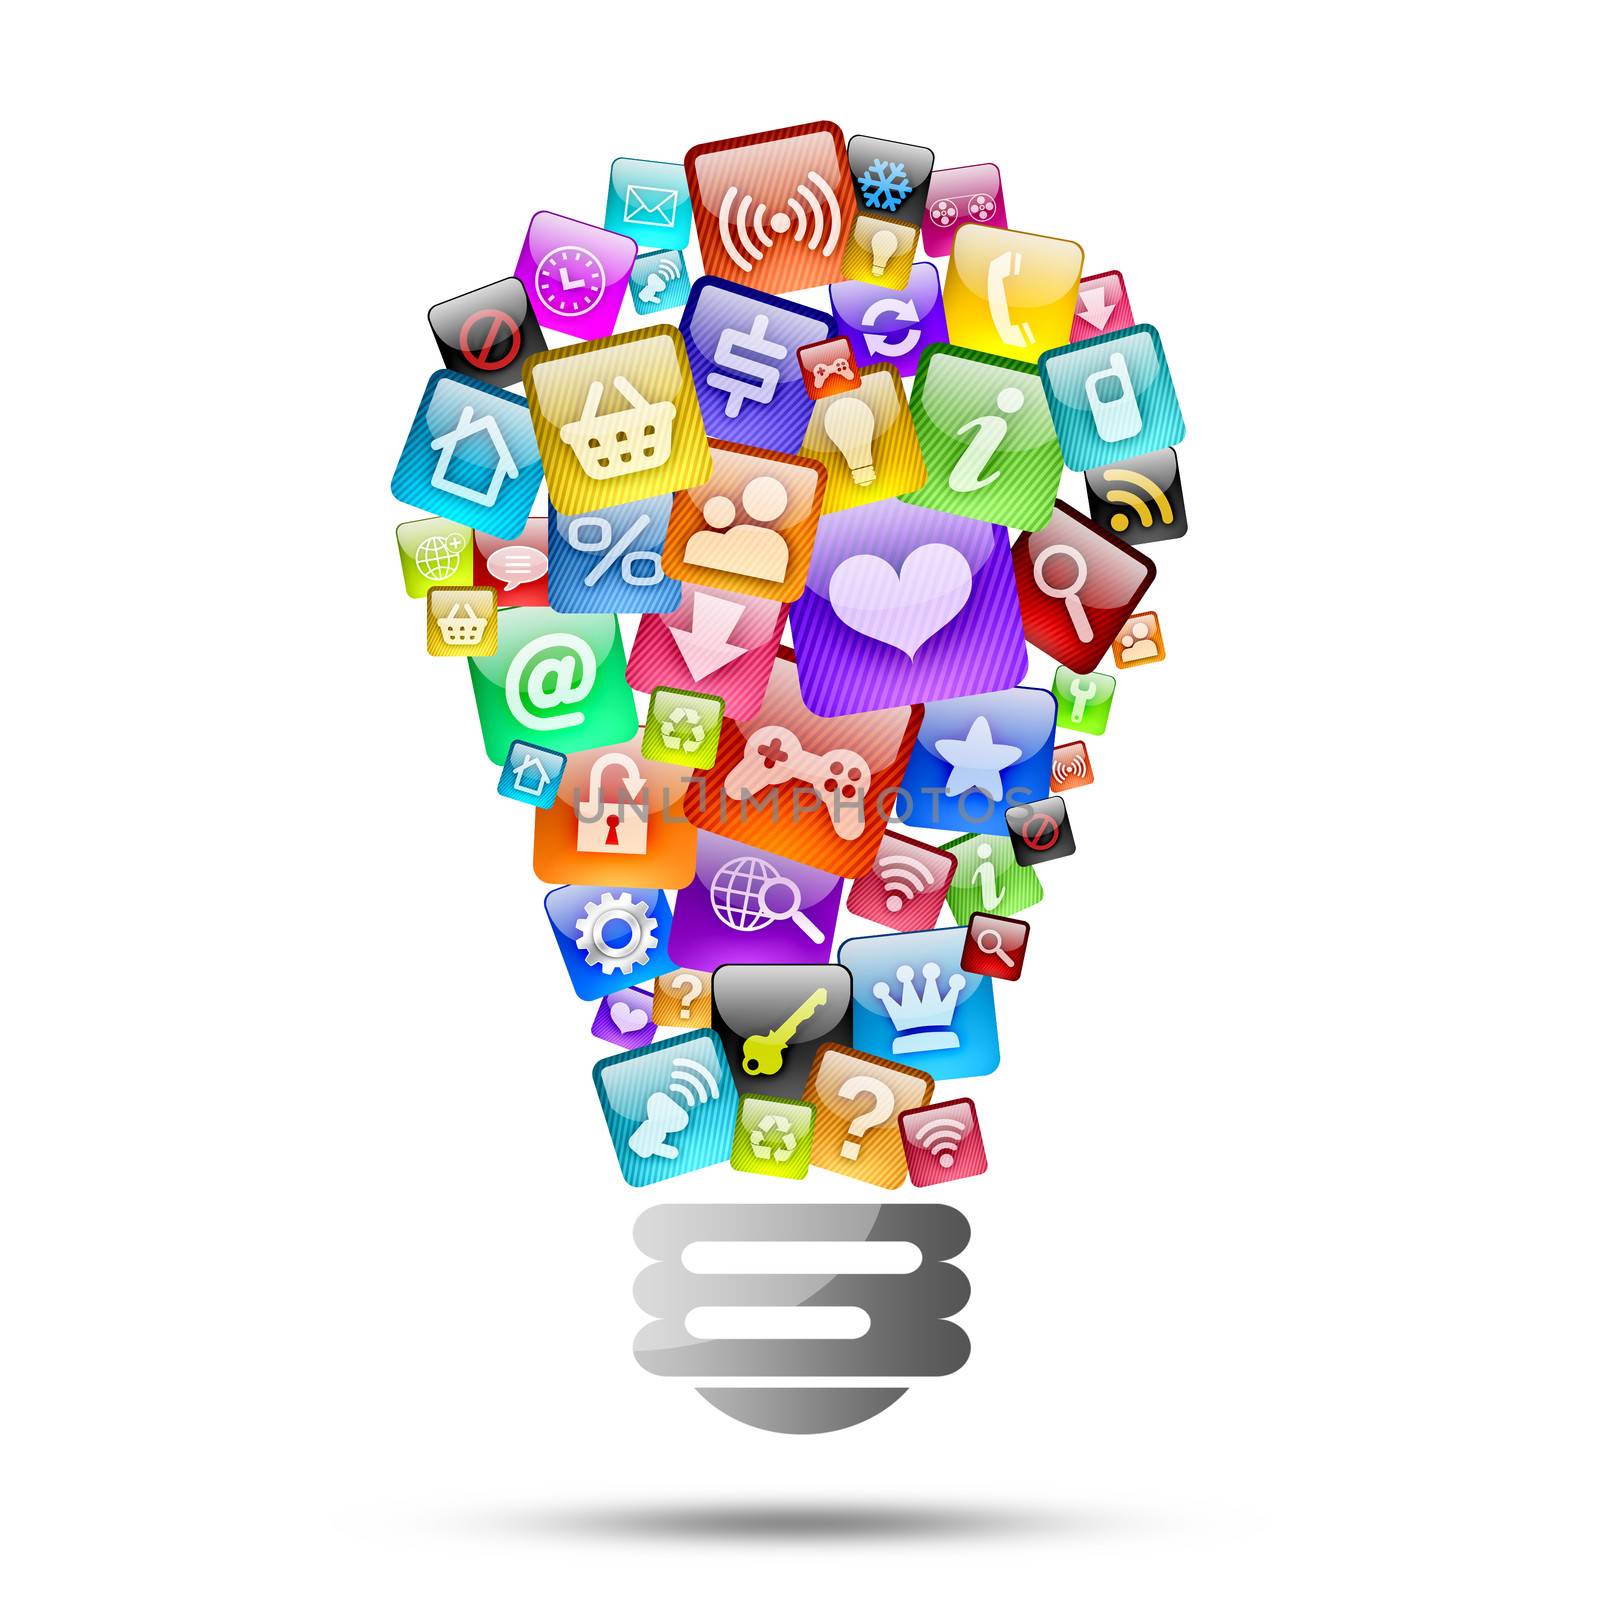 Lamp consisting of apps icons. The concept of software